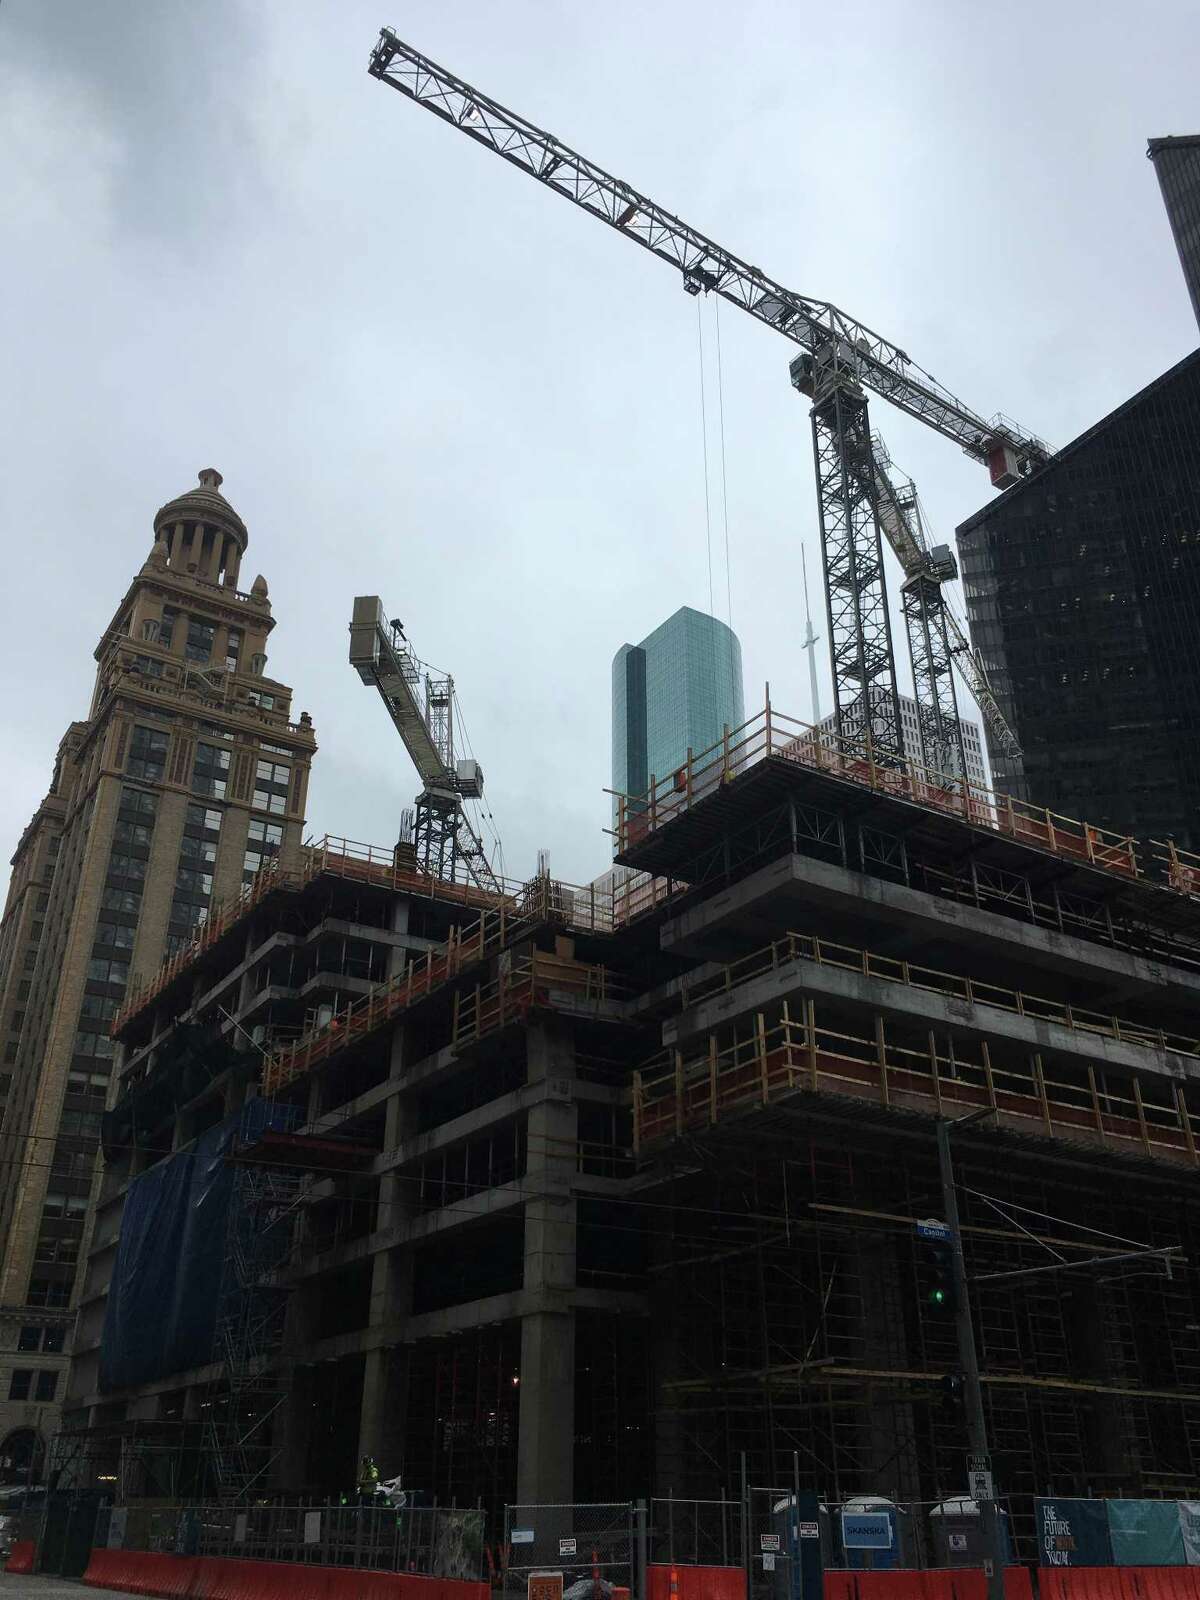 Construction of Capitol Tower continues at 800Â CapitolÂ in downtown Houston. Since April, five floors of office portion of the 35-story tower have been built and 10 floors of the garage are up. Bank of America will move to the tower in 2019. June 22, 2017 photo.